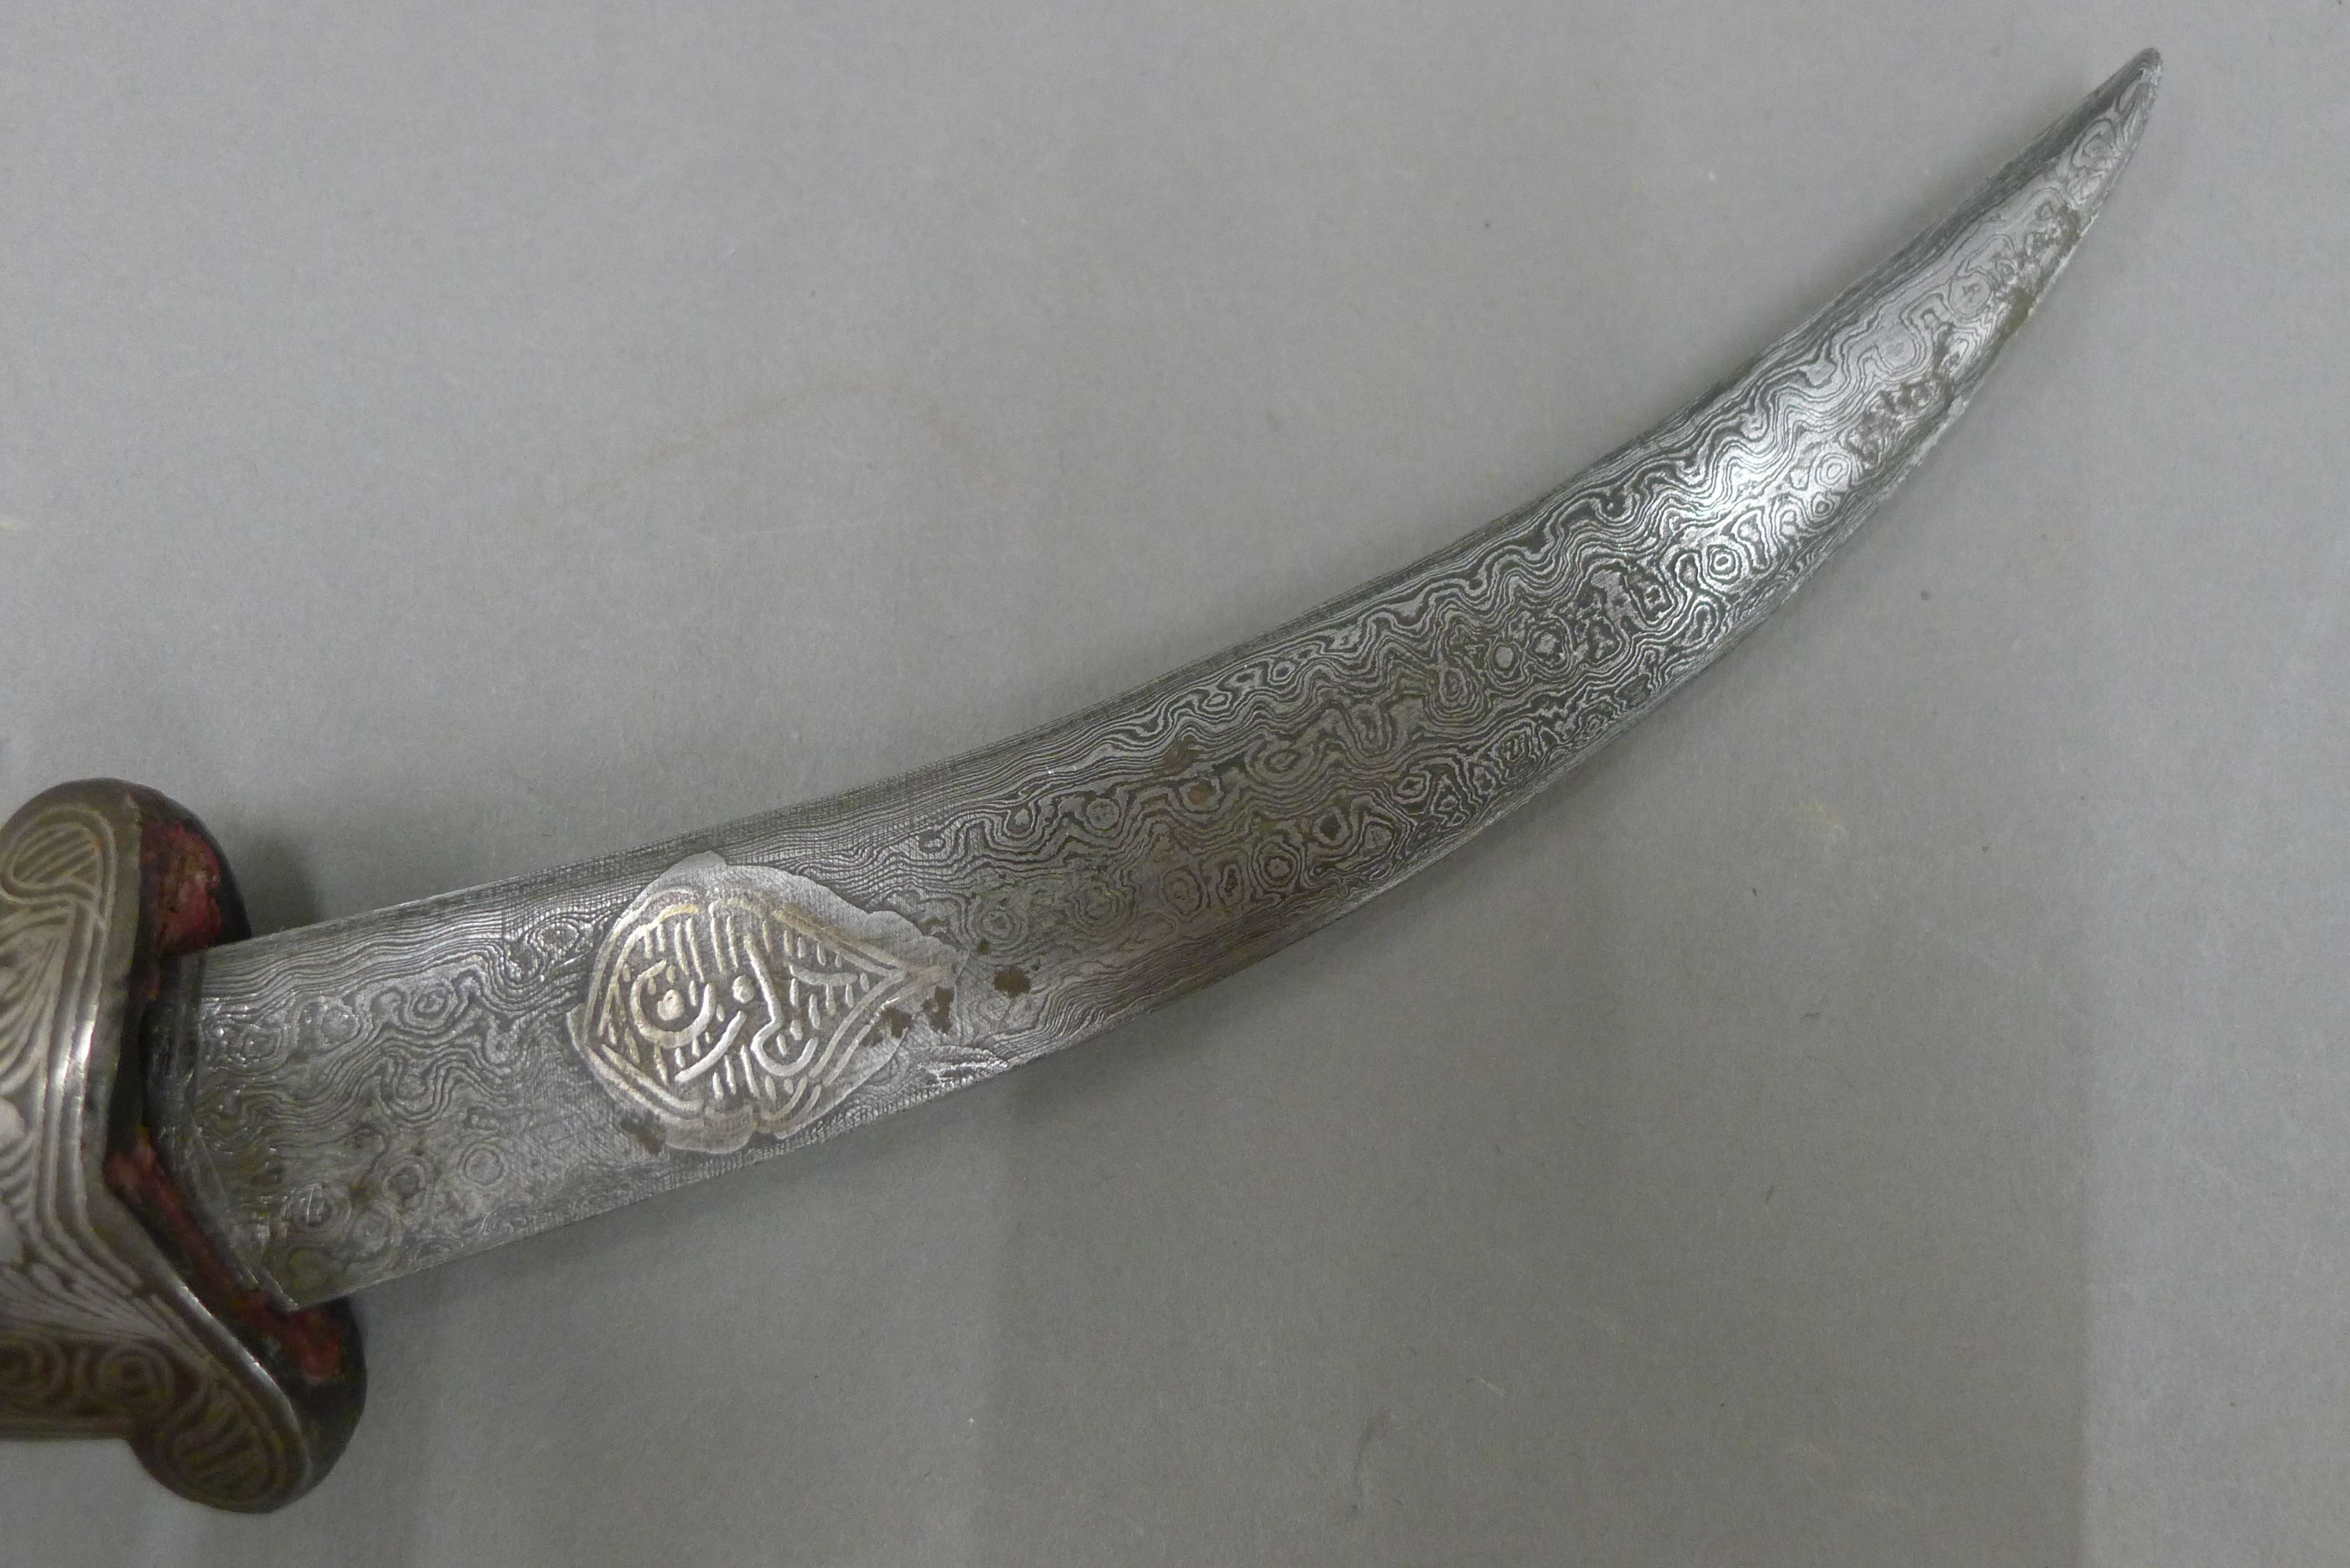 A 19th century Persian knife, the steel scabbard and grip inlaid with silver, - Image 4 of 6